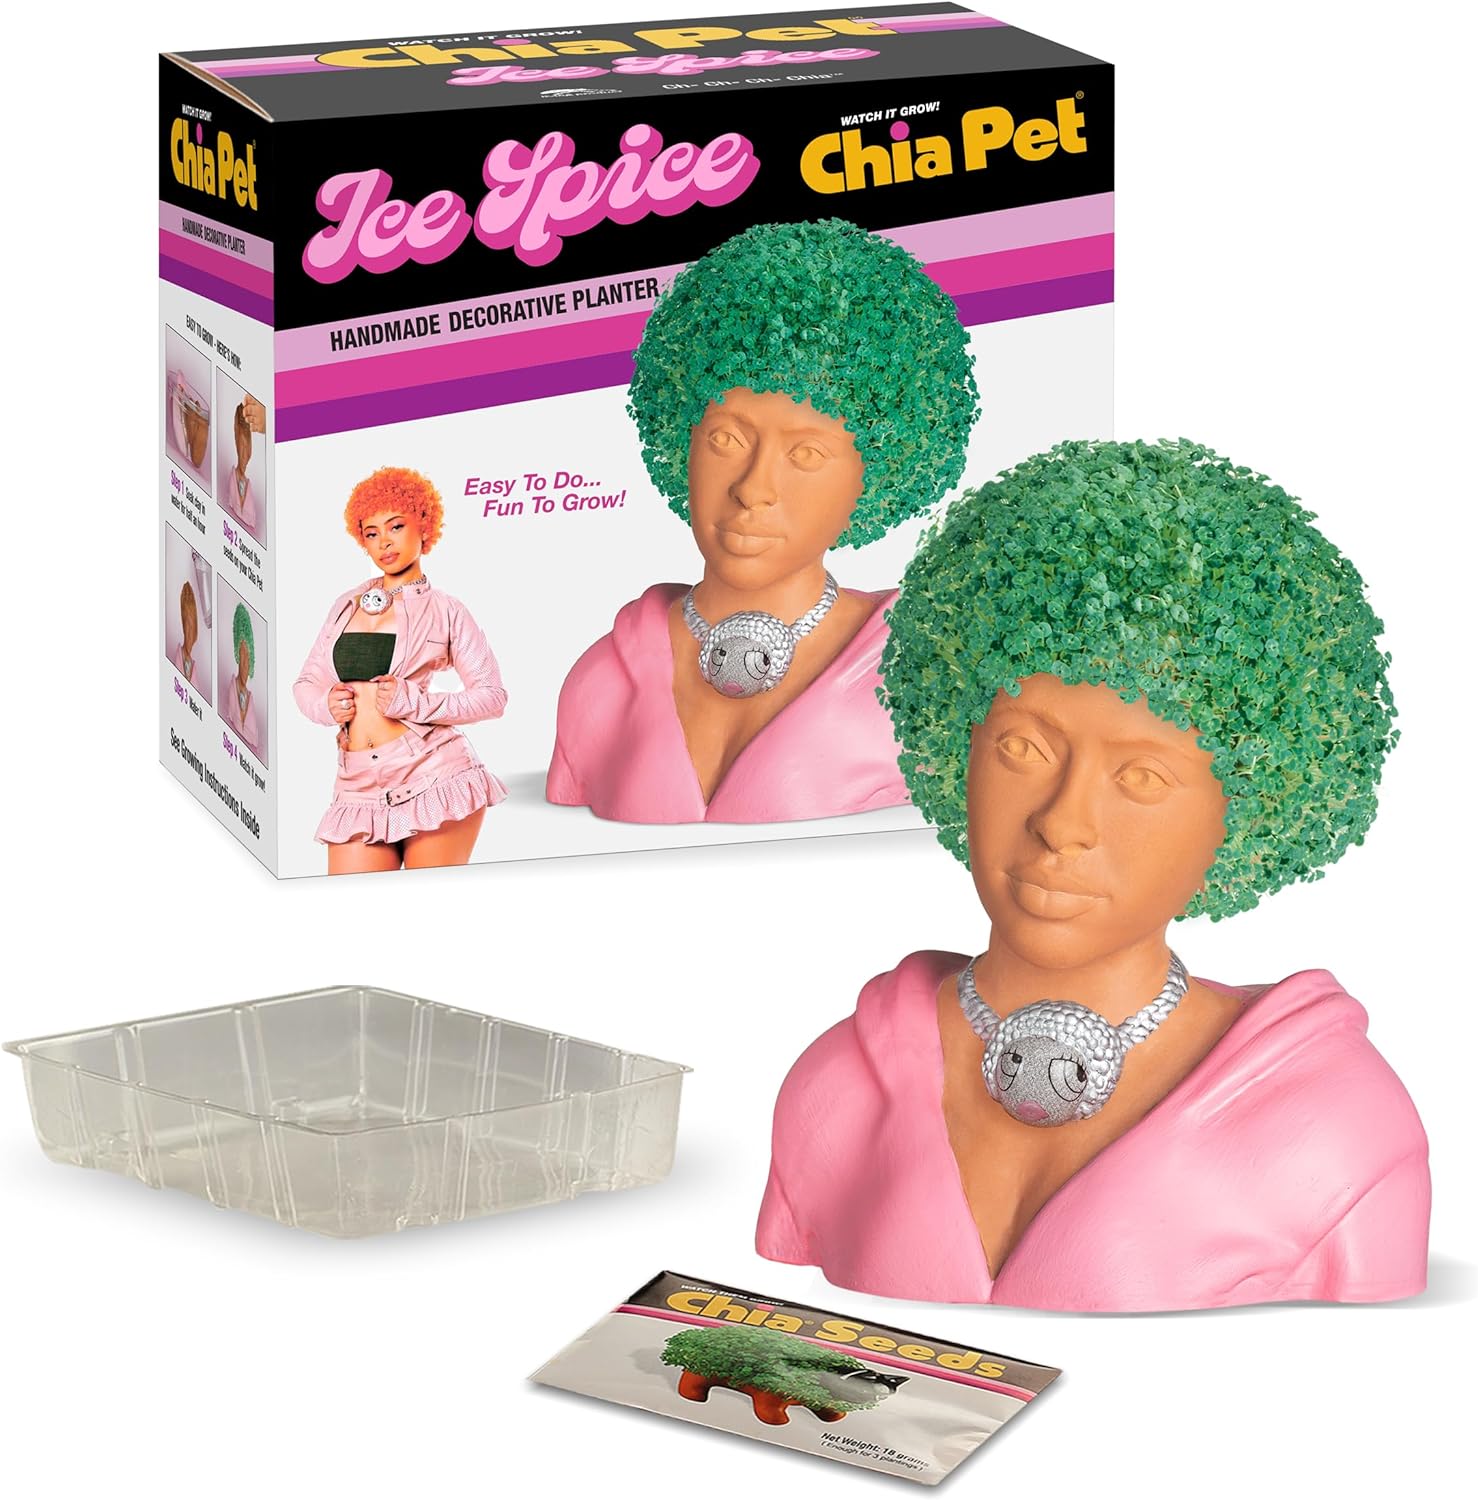 THE ICE SPICE CHIA PET